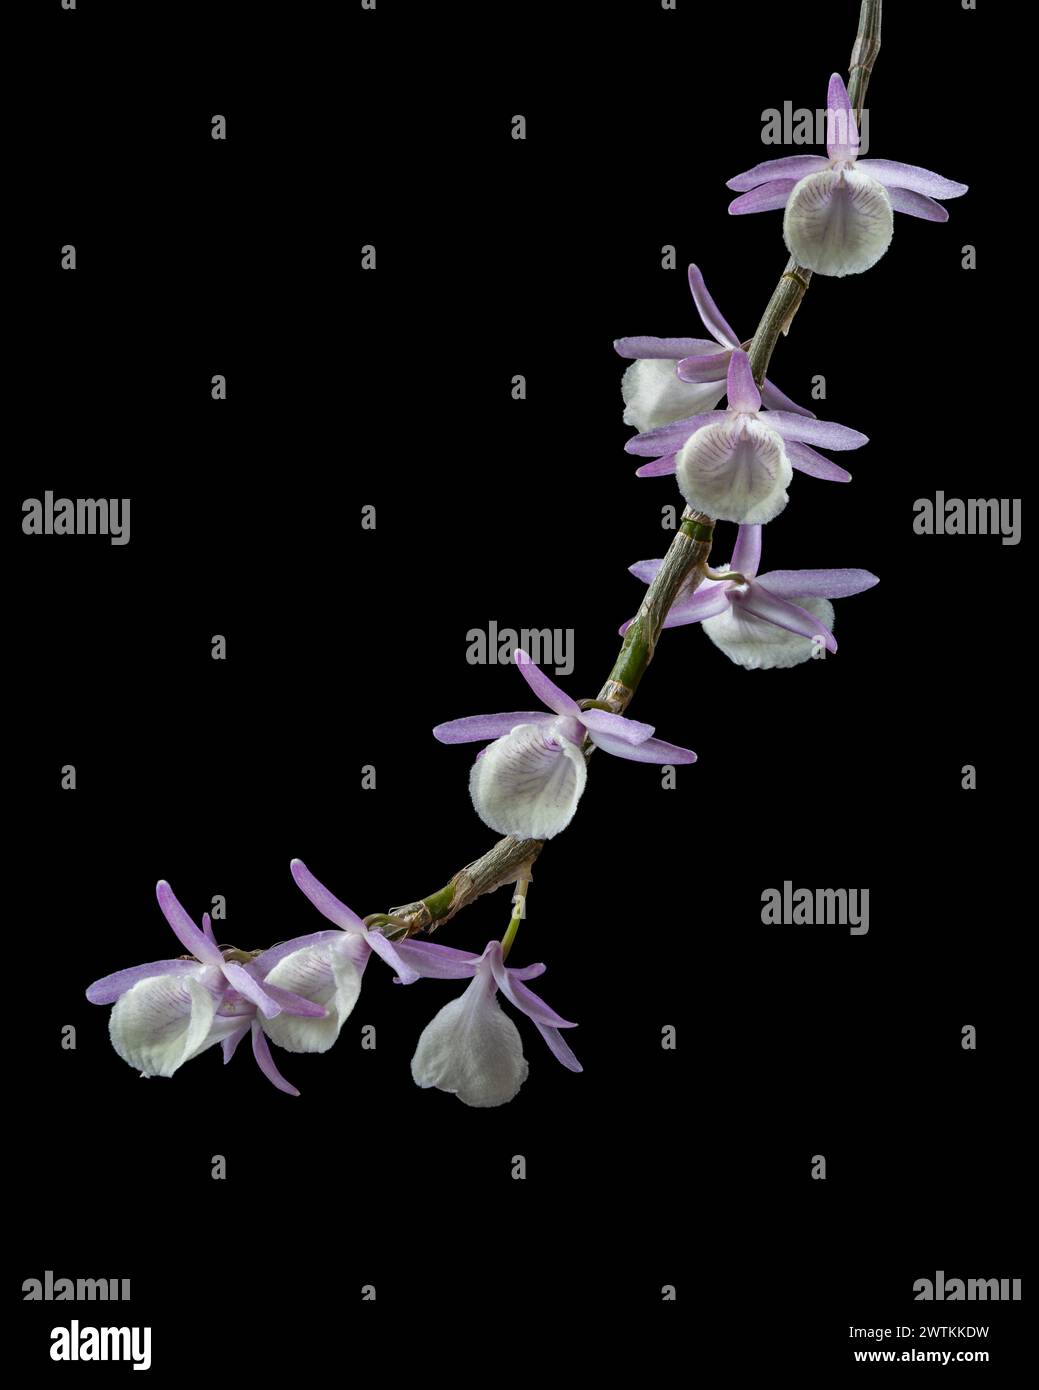 Closeup view of purple pink and creamy white flowers of epiphytic orchid dendrobium primulinum or primrose dendrobium isolated on black background Stock Photo